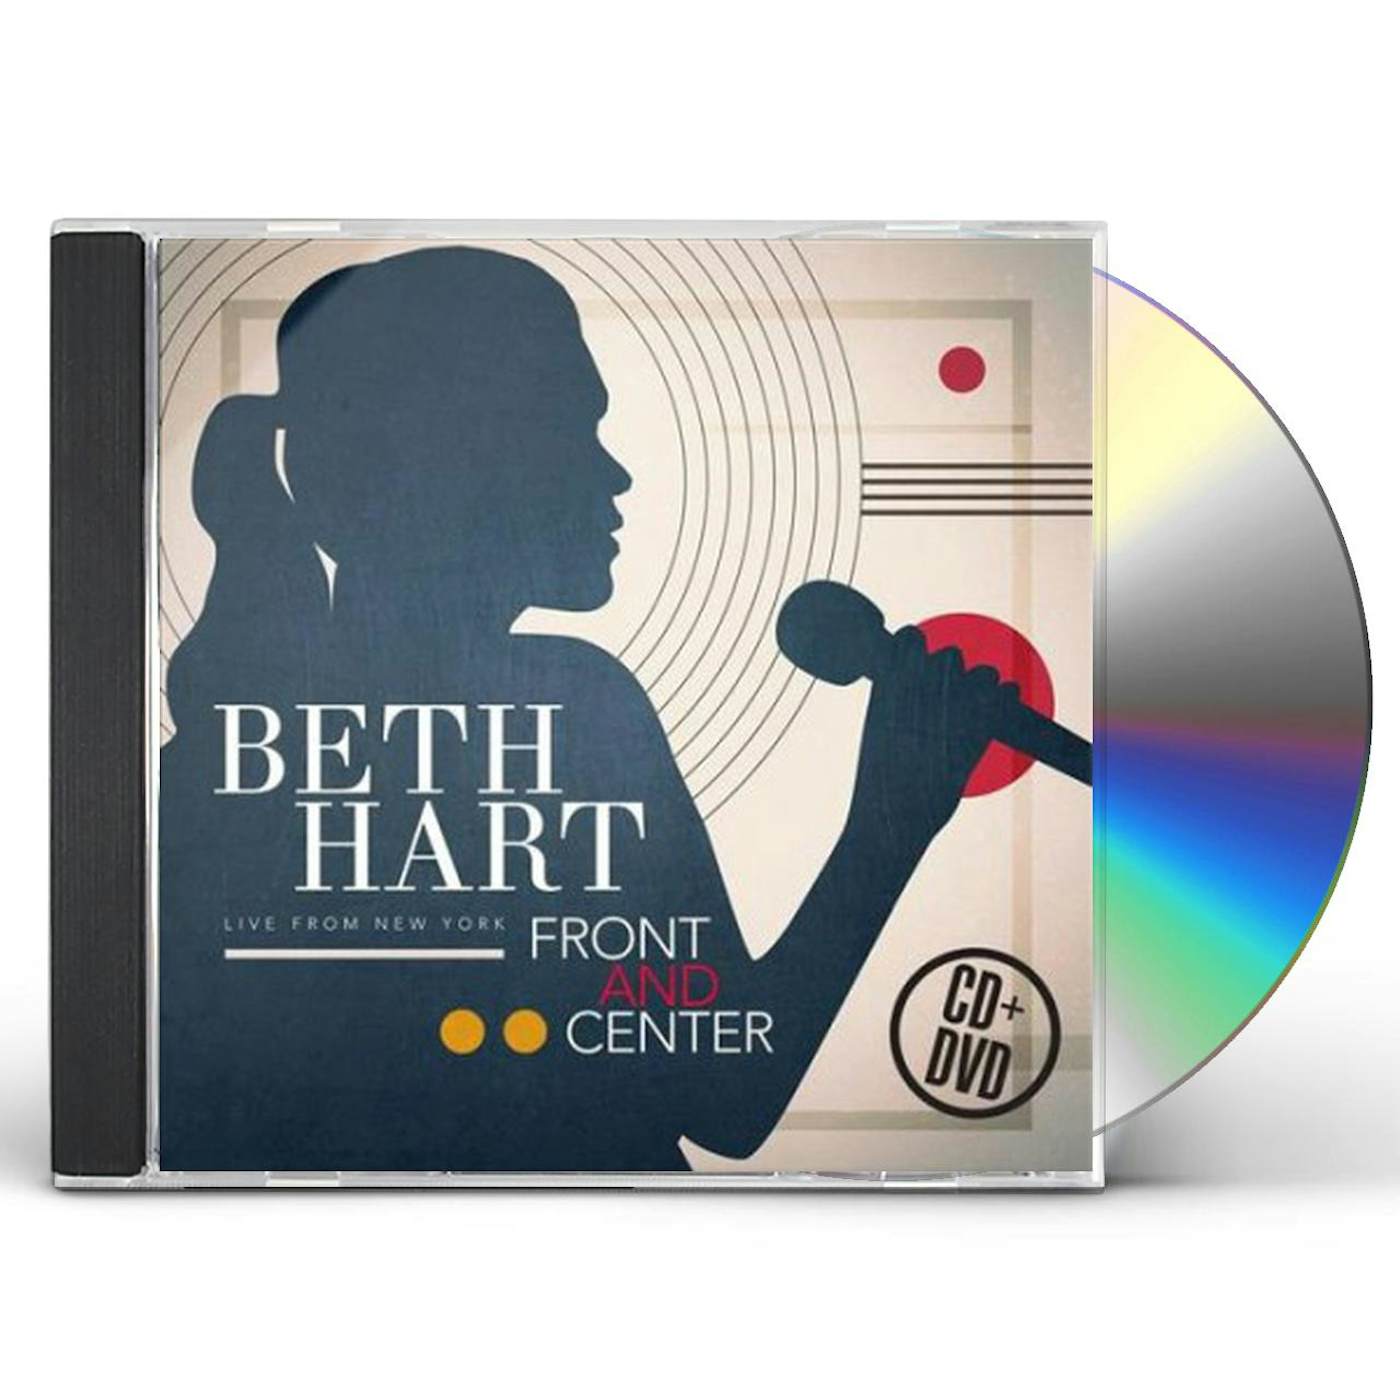 Beth Hart FRONT AND CENTER LIVE FROM NEW YORK CD